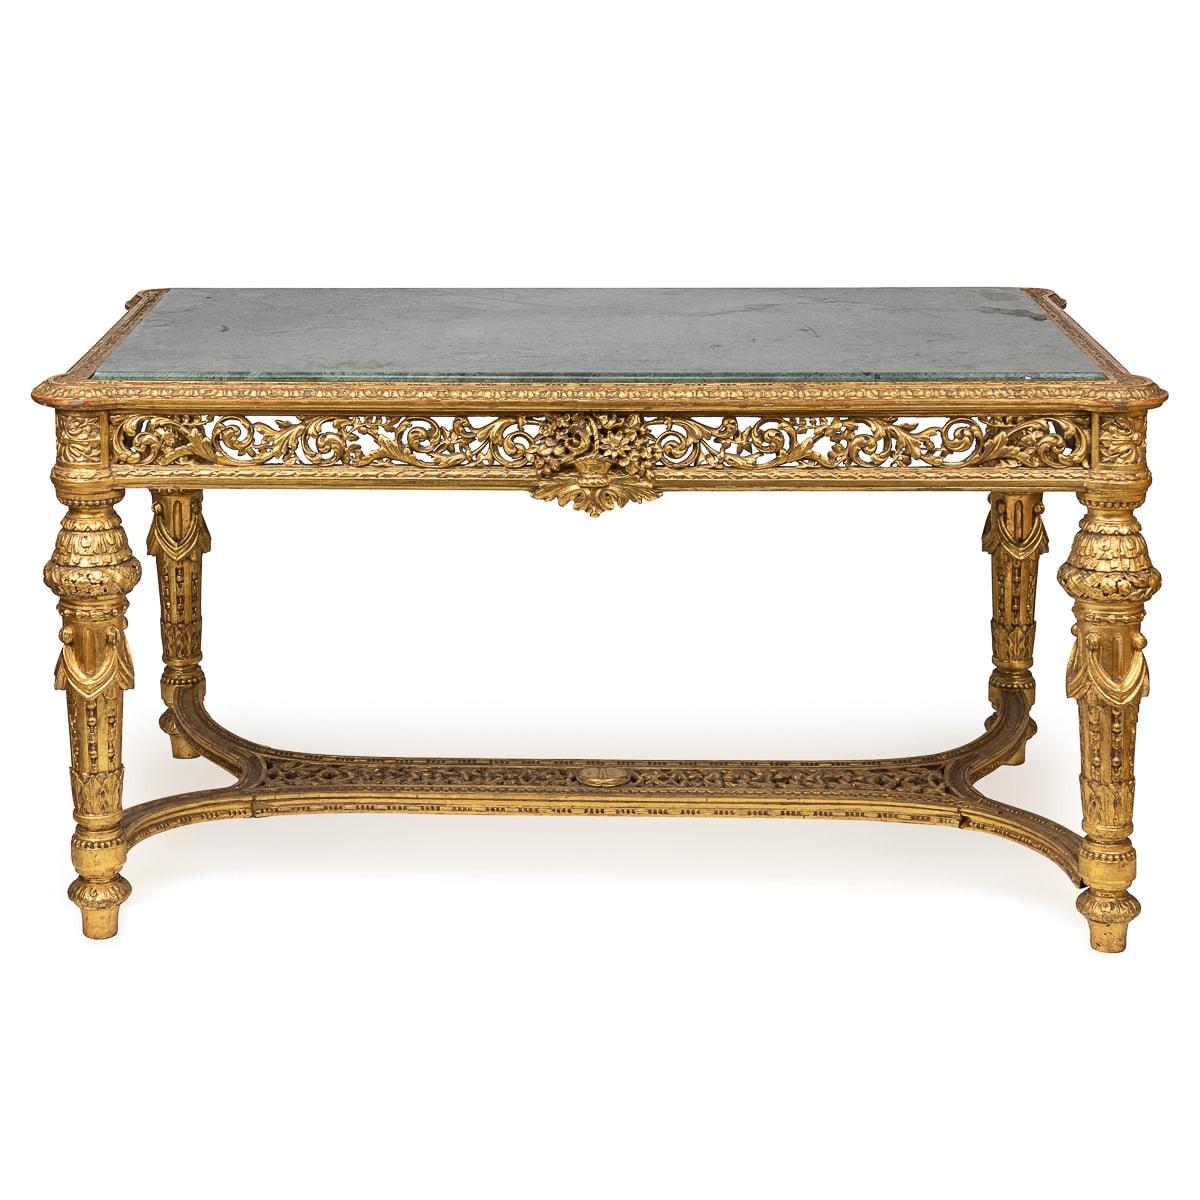 Antique late 19th Century French Louis XVI large giltwood salon table, a tasteful marriage of giltwood and green alp marble. Adorned with intricately carved foliage motifs gracing its sides, legs, and supporting structure, this table exudes a highly